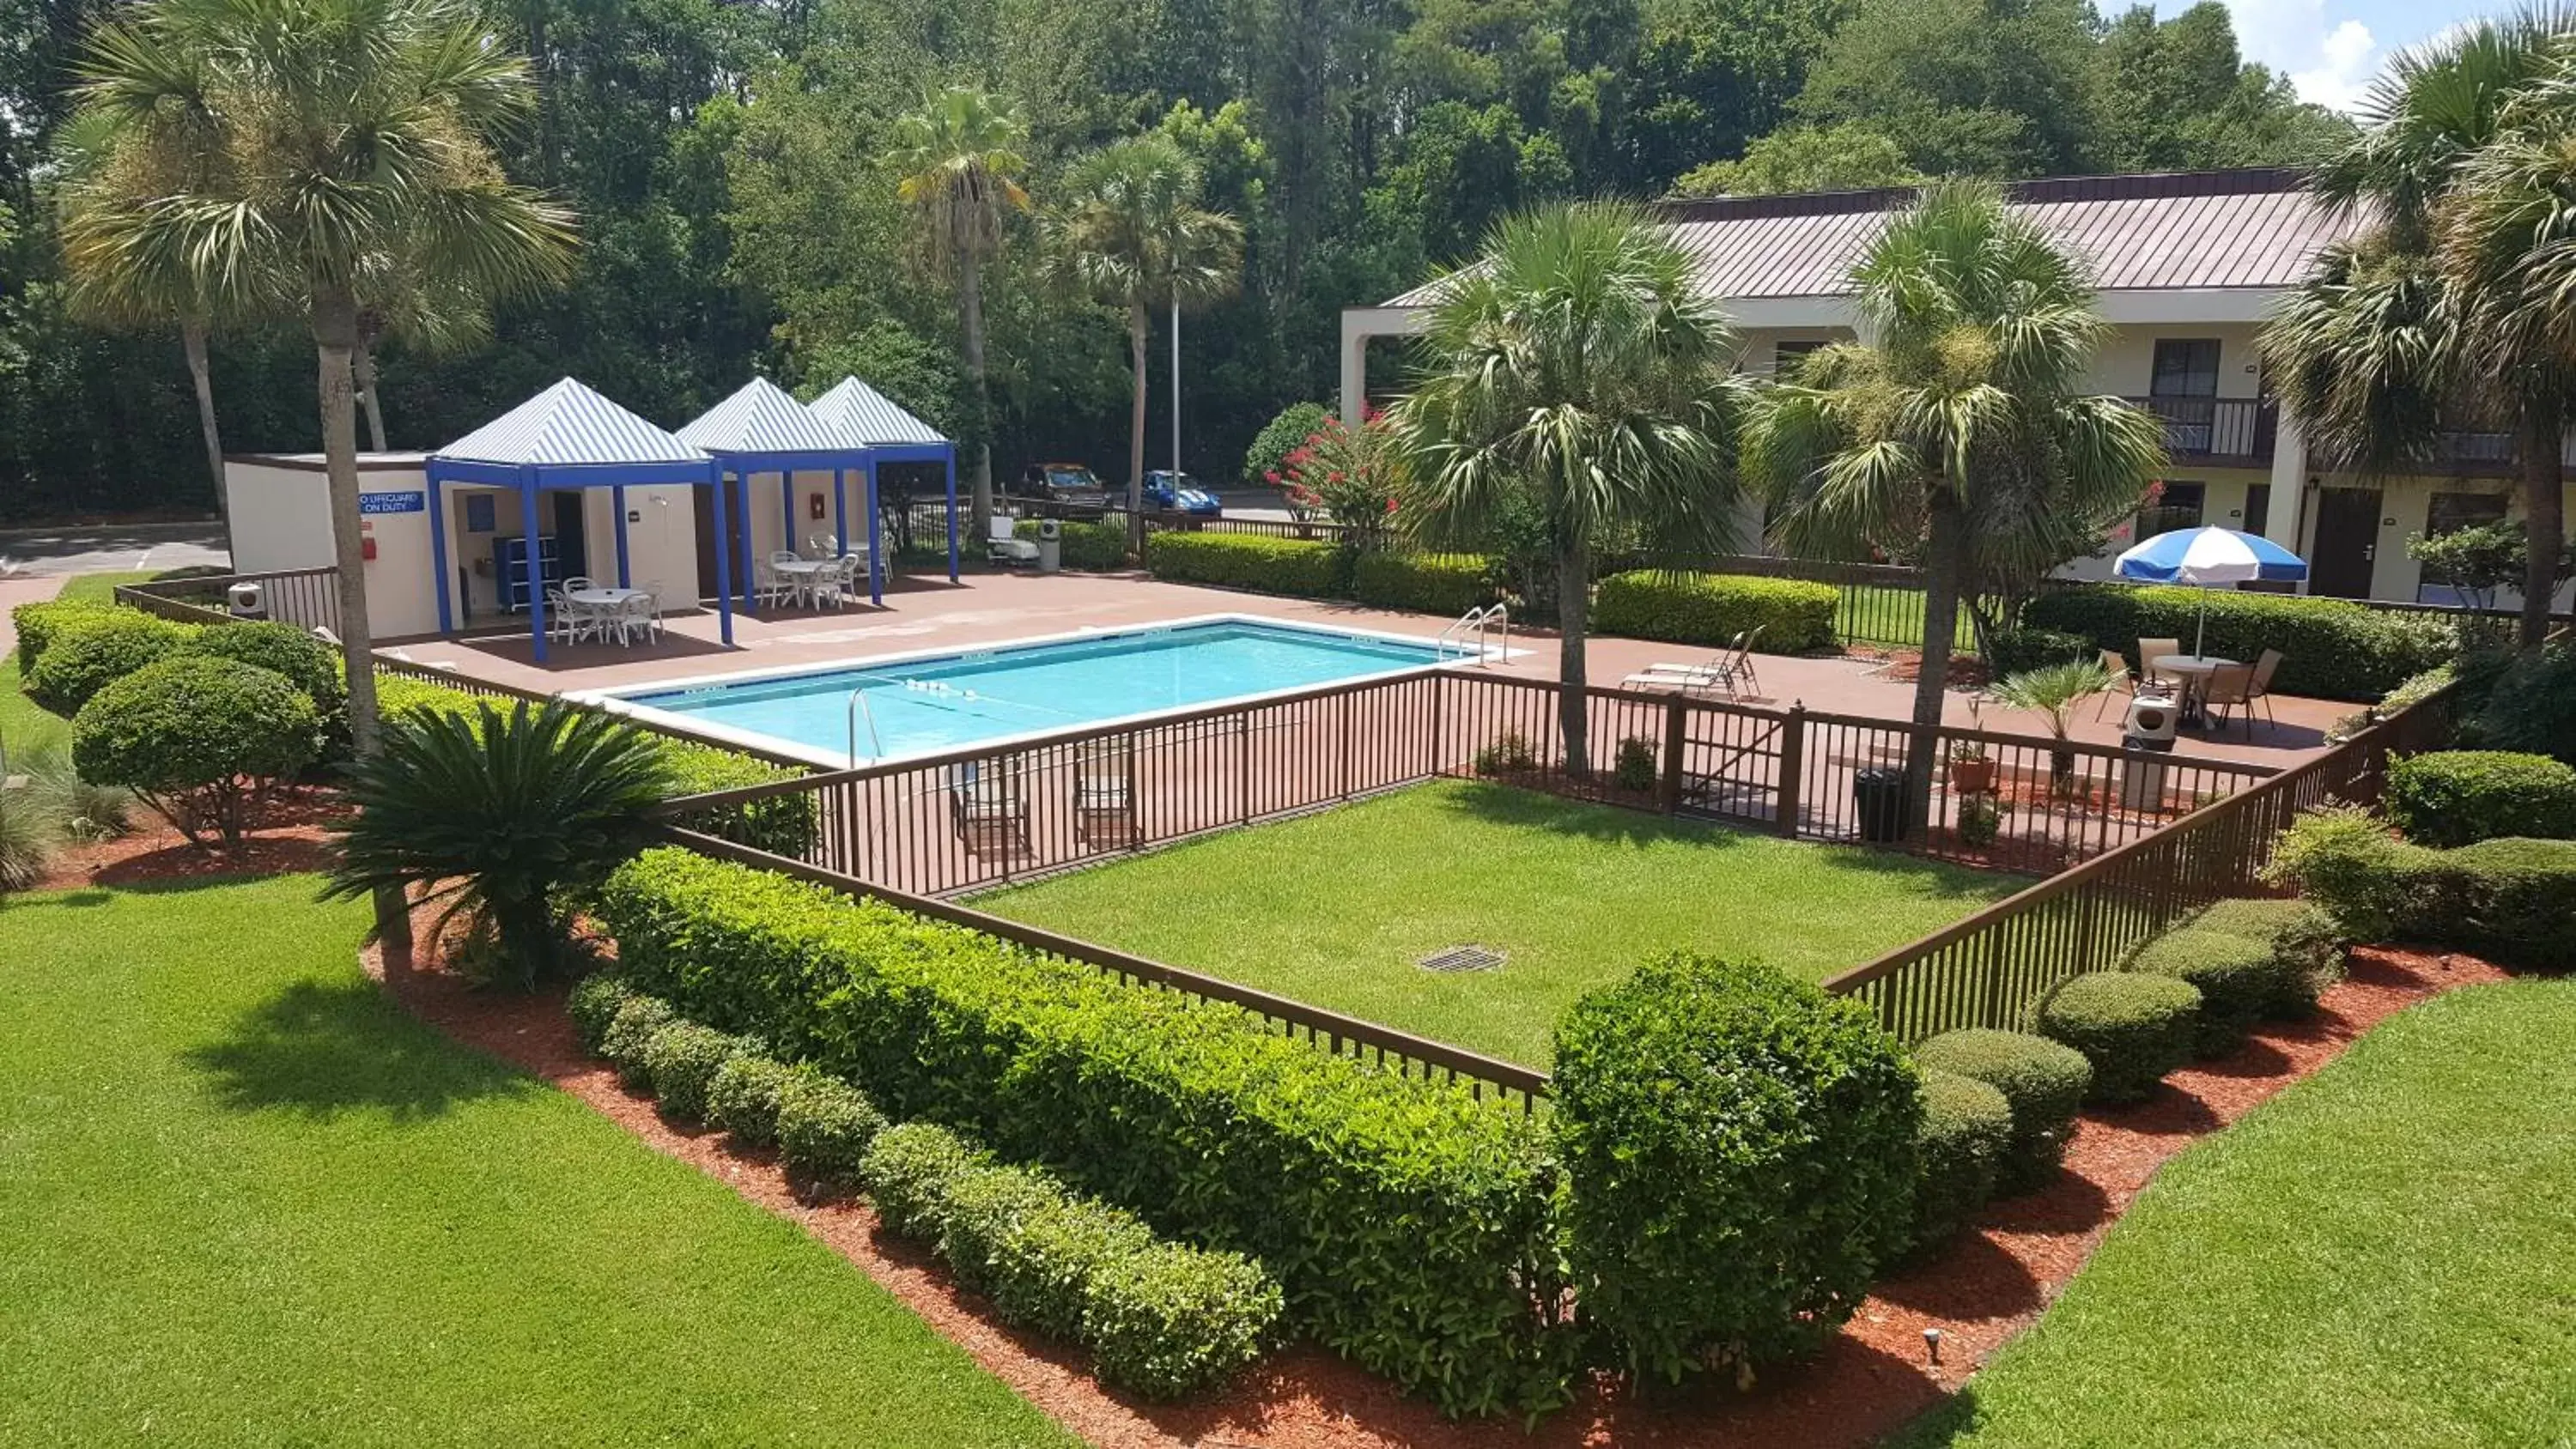 Property building, Pool View in Days Inn by Wyndham Jacksonville Airport